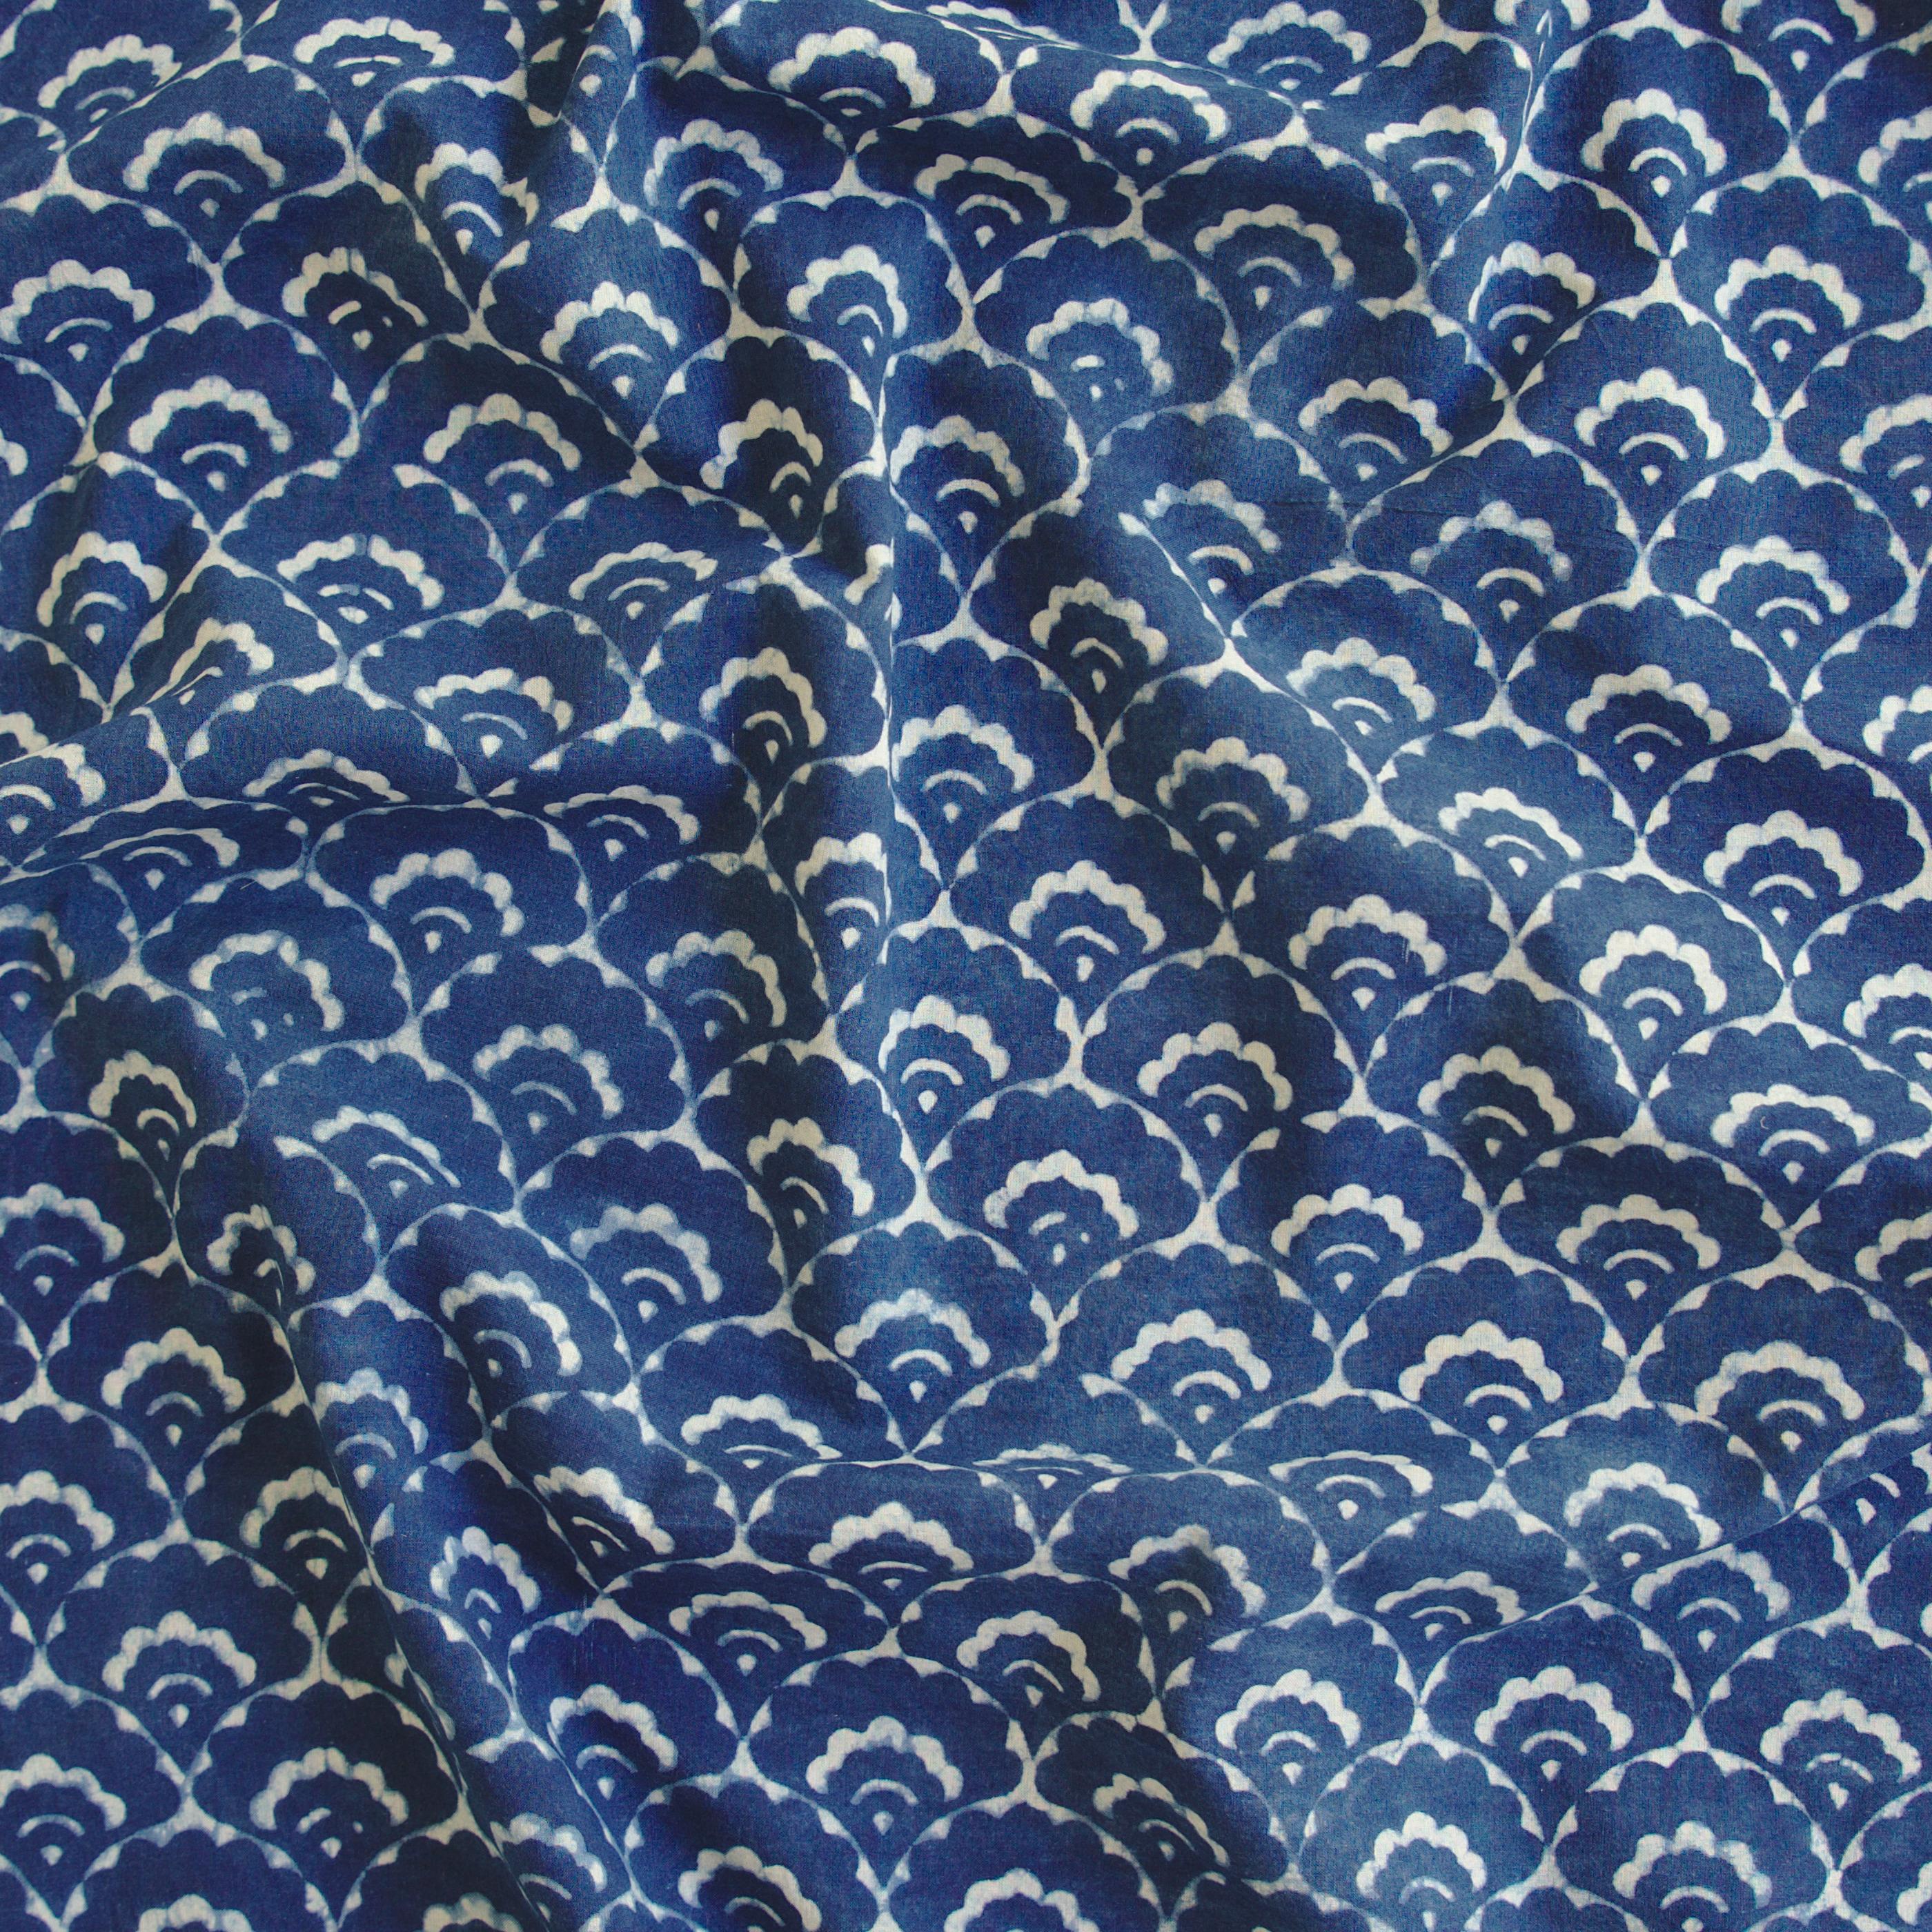 Indian Block-Printed Cotton - Clouds Print - Printed With Resist and Dyed in Indigo - Contrast